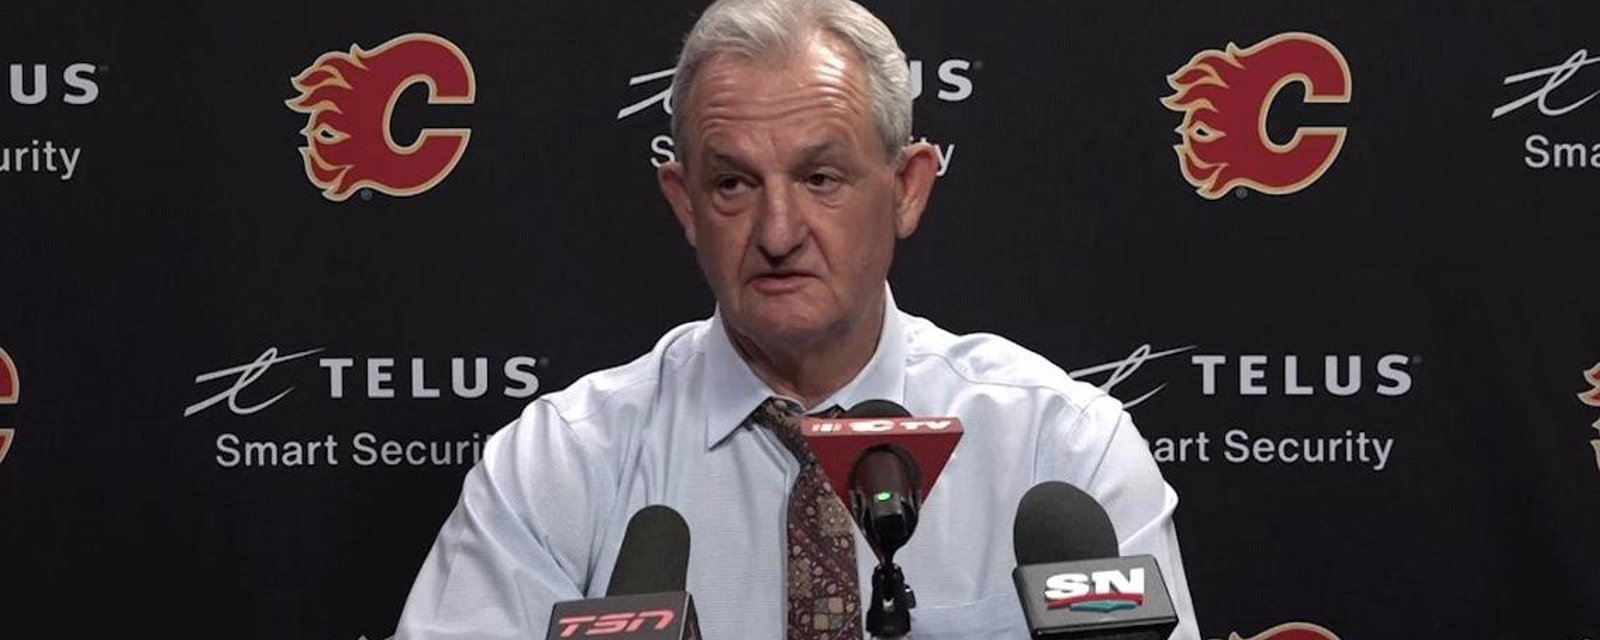 Fans want Darryl Sutter fired and already hint at imminent replacement